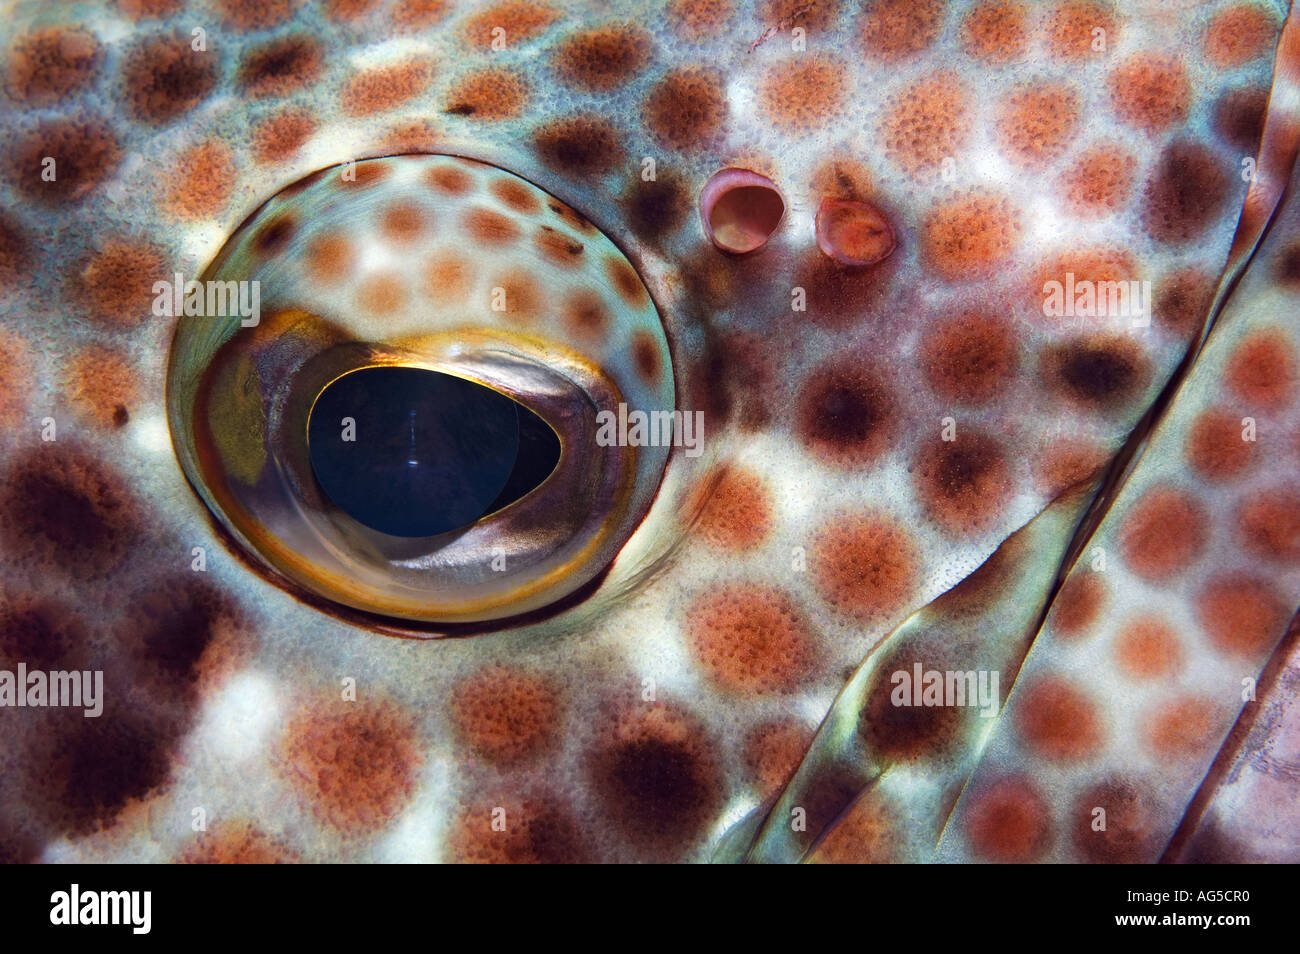 close-up of eye of greasy grouper Stock Photo